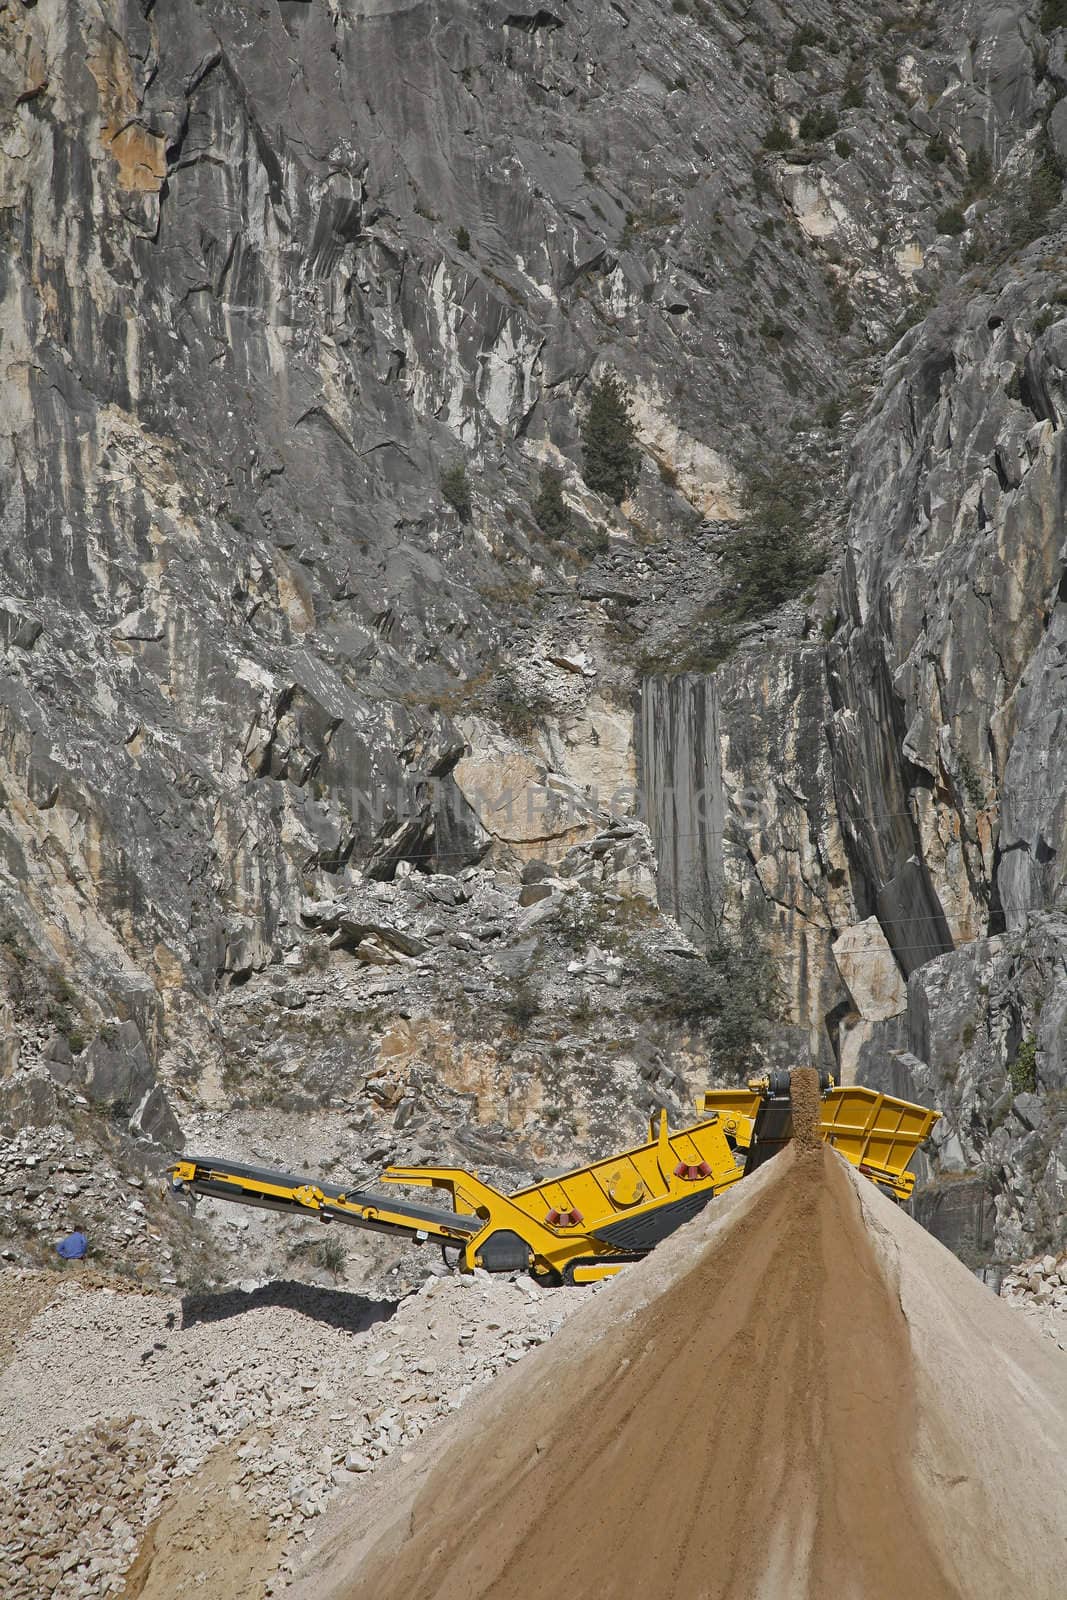 Machine crushing small pieces of marble to road materials in the mountains near the Italian city Carrara.